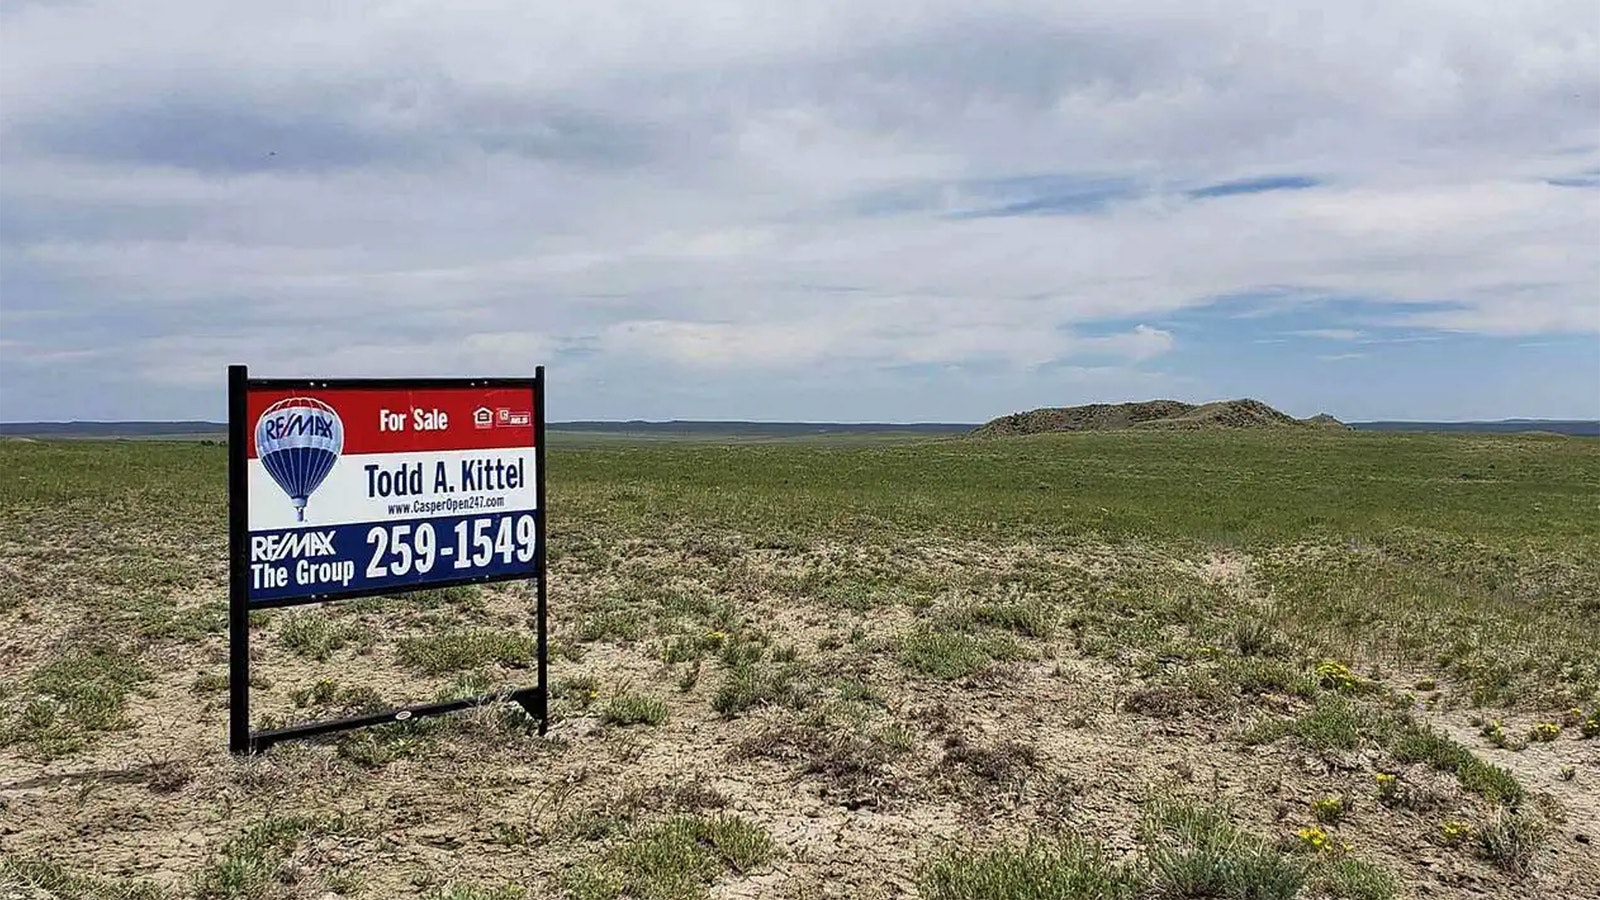 Landsearch.com has listings for more than 40 Wyoming lots that might be suitable for off-grid living, including a 40.5-acre parcel in Natrona County.